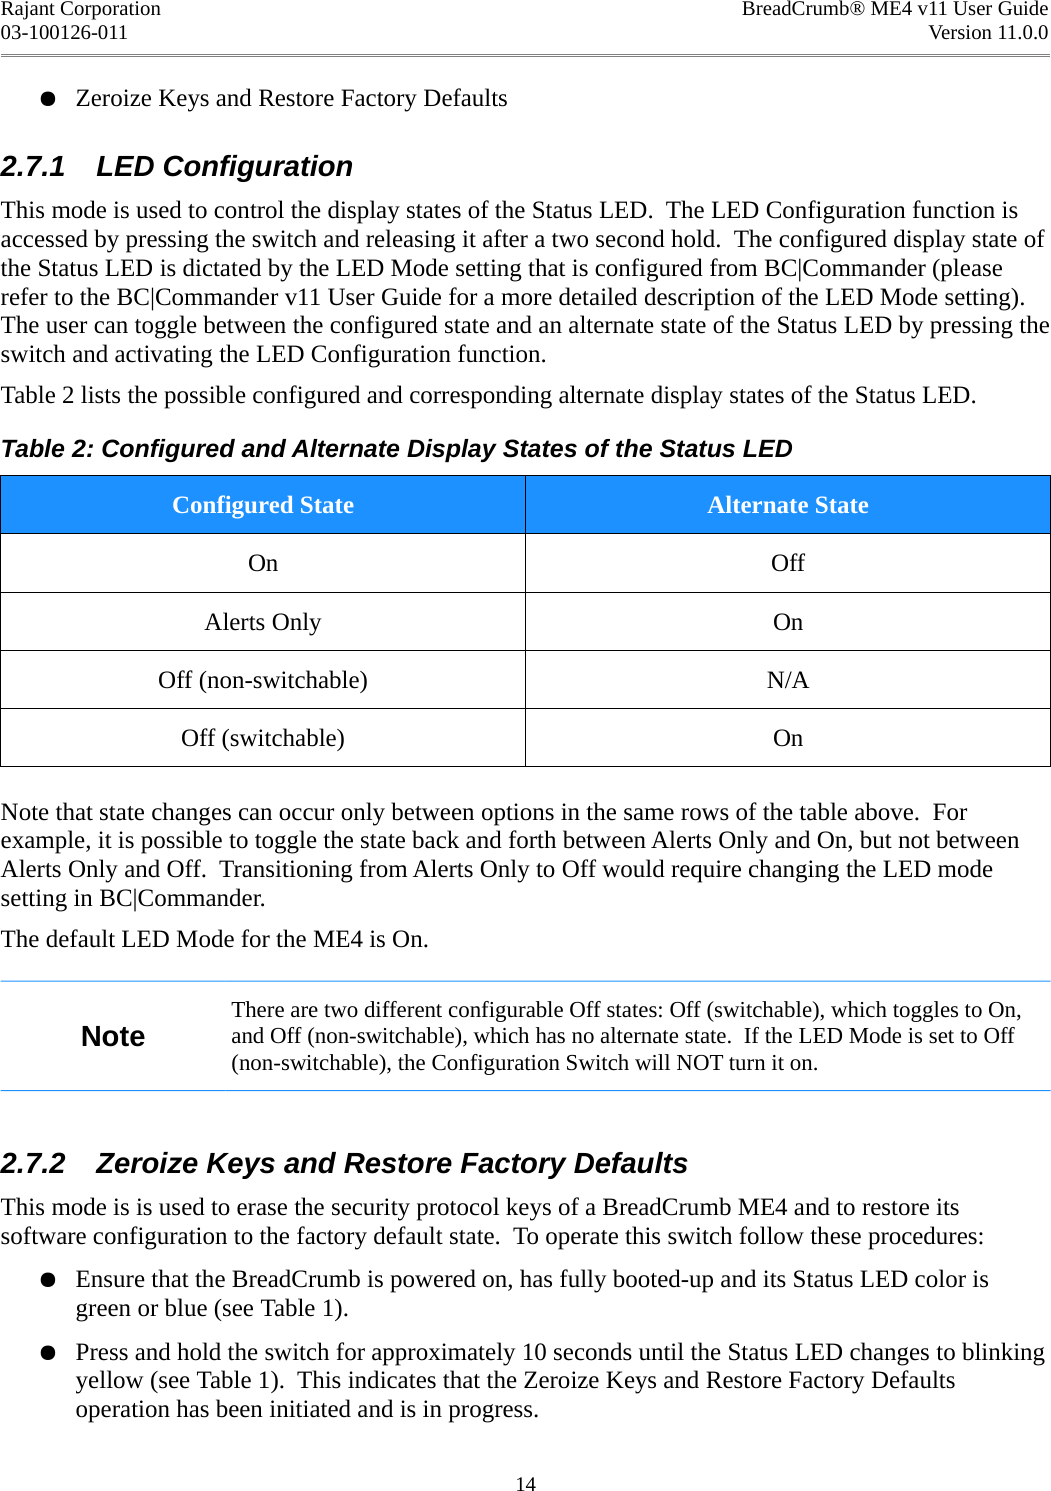 Rajant Corporation BreadCrumb® ME4 v11 User Guide03-100126-011 Version 11.0.0●Zeroize Keys and Restore Factory Defaults2.7.1  LED ConfigurationThis mode is used to control the display states of the Status LED.  The LED Configuration function is accessed by pressing the switch and releasing it after a two second hold.  The configured display state of the Status LED is dictated by the LED Mode setting that is configured from BC|Commander (please refer to the BC|Commander v11 User Guide for a more detailed description of the LED Mode setting). The user can toggle between the configured state and an alternate state of the Status LED by pressing the switch and activating the LED Configuration function.Table 2 lists the possible configured and corresponding alternate display states of the Status LED.Table 2: Configured and Alternate Display States of the Status LEDConfigured State Alternate StateOn OffAlerts Only OnOff (non-switchable) N/AOff (switchable) OnNote that state changes can occur only between options in the same rows of the table above.  For example, it is possible to toggle the state back and forth between Alerts Only and On, but not between Alerts Only and Off.  Transitioning from Alerts Only to Off would require changing the LED mode setting in BC|Commander.The default LED Mode for the ME4 is On.NoteThere are two different configurable Off states: Off (switchable), which toggles to On, and Off (non-switchable), which has no alternate state.  If the LED Mode is set to Off (non-switchable), the Configuration Switch will NOT turn it on.2.7.2  Zeroize Keys and Restore Factory DefaultsThis mode is is used to erase the security protocol keys of a BreadCrumb ME4 and to restore its software configuration to the factory default state.  To operate this switch follow these procedures:●Ensure that the BreadCrumb is powered on, has fully booted-up and its Status LED color is green or blue (see Table 1).●Press and hold the switch for approximately 10 seconds until the Status LED changes to blinking yellow (see Table 1).  This indicates that the Zeroize Keys and Restore Factory Defaults operation has been initiated and is in progress.14